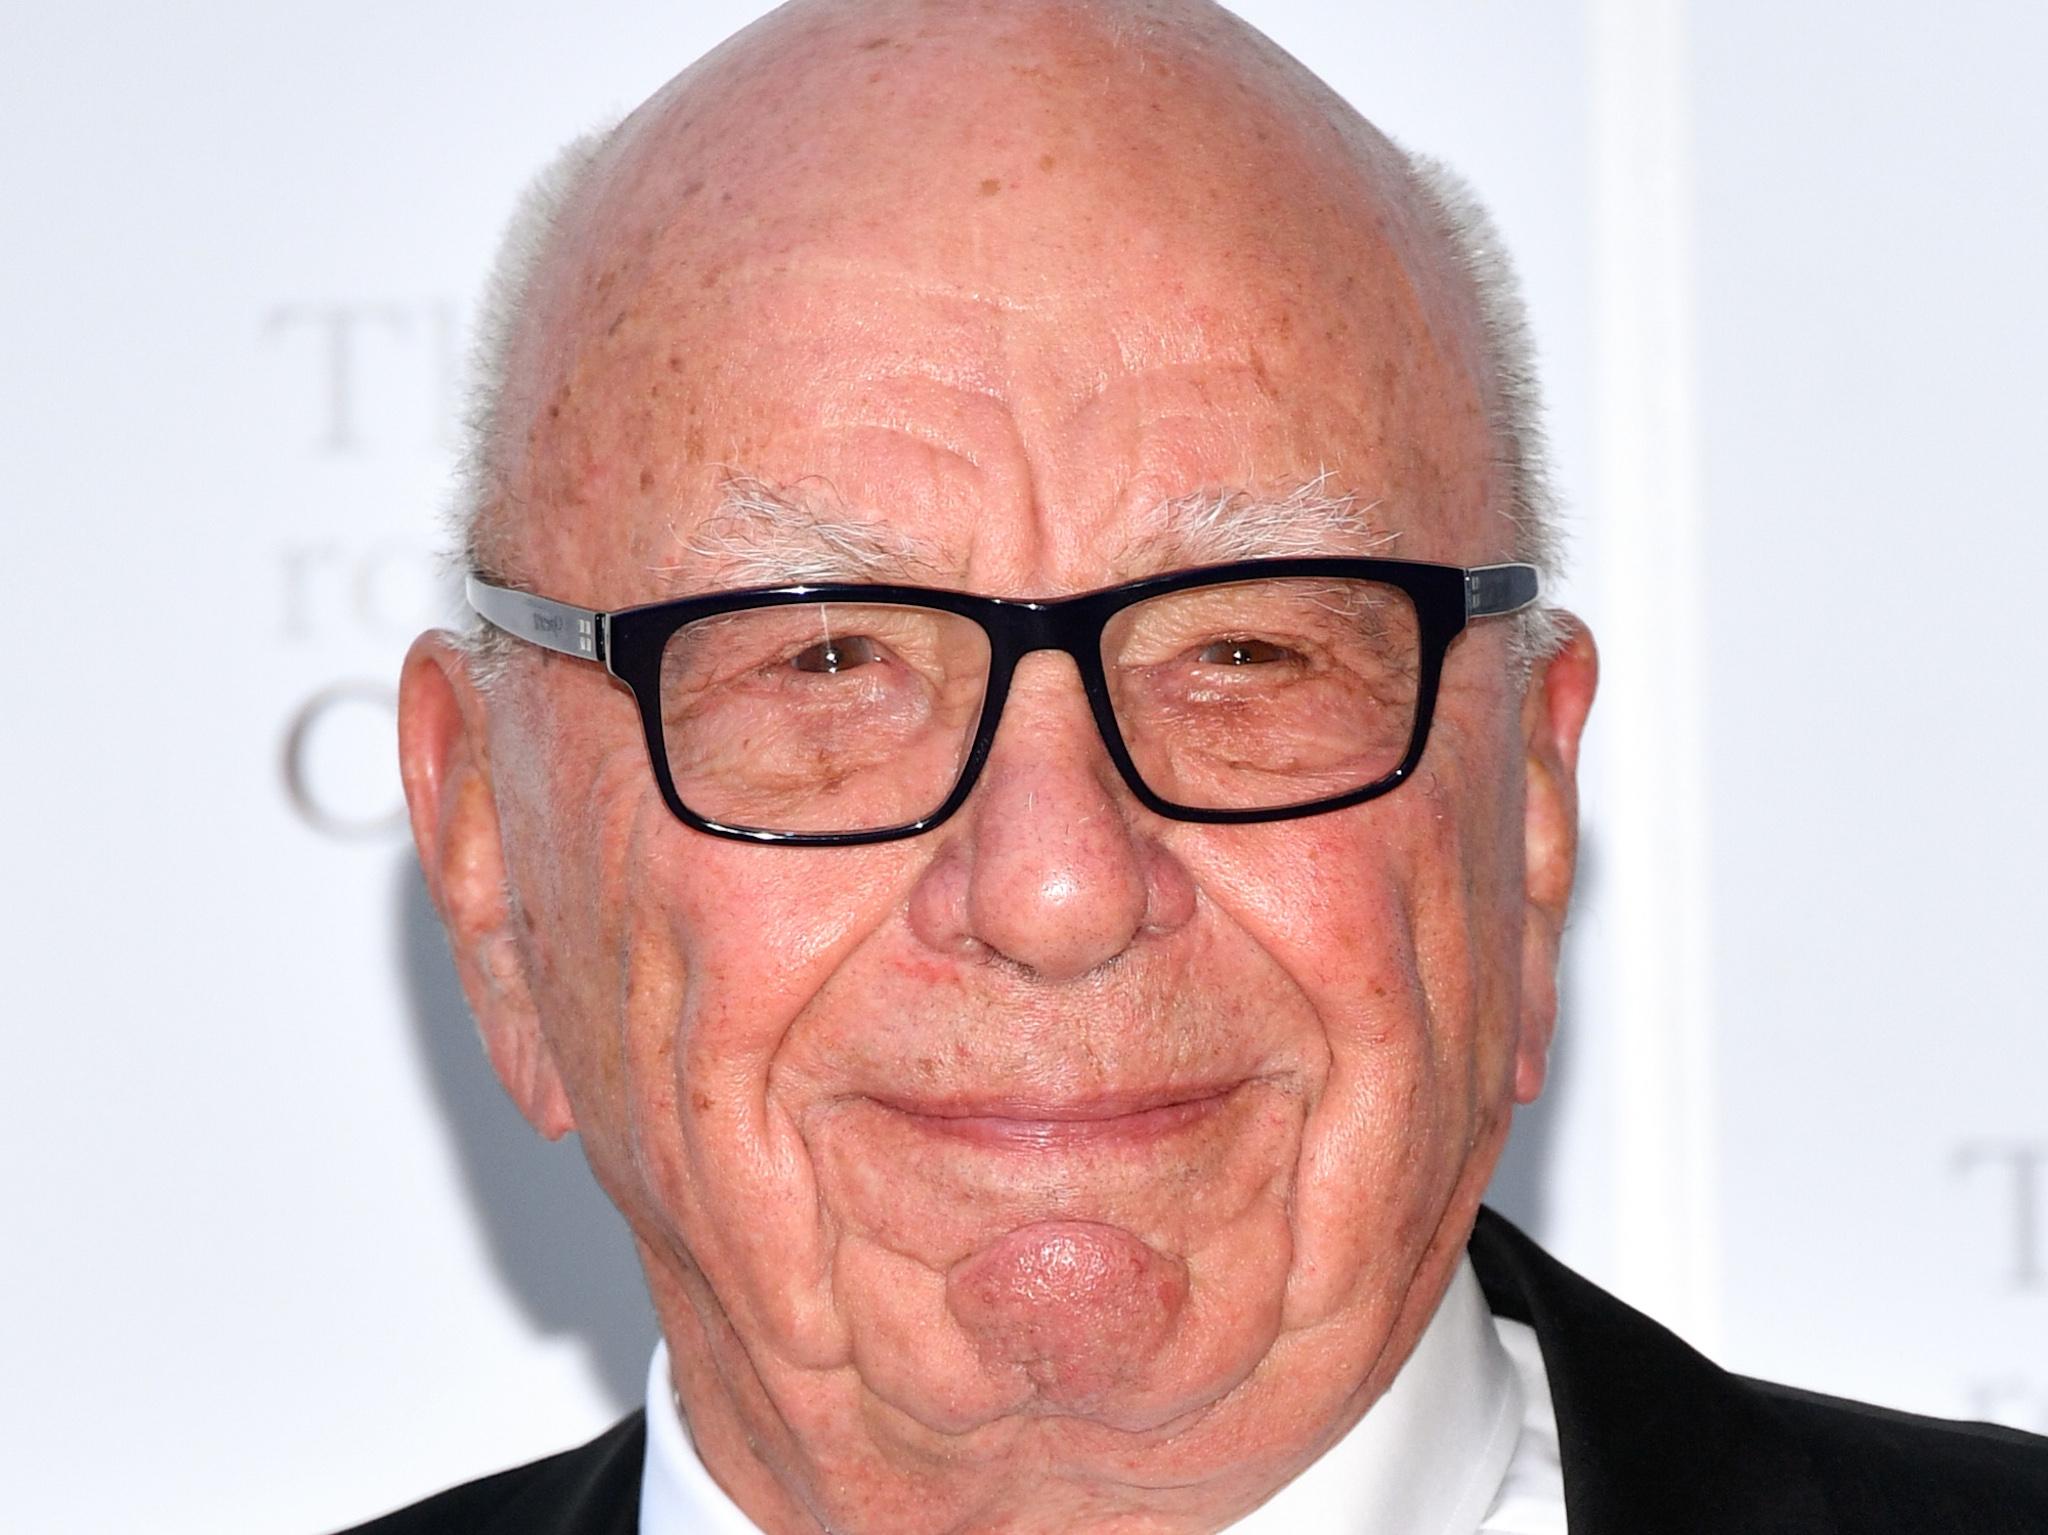 Deal risked handing the Murdoch family too much control over the British media, regulator says